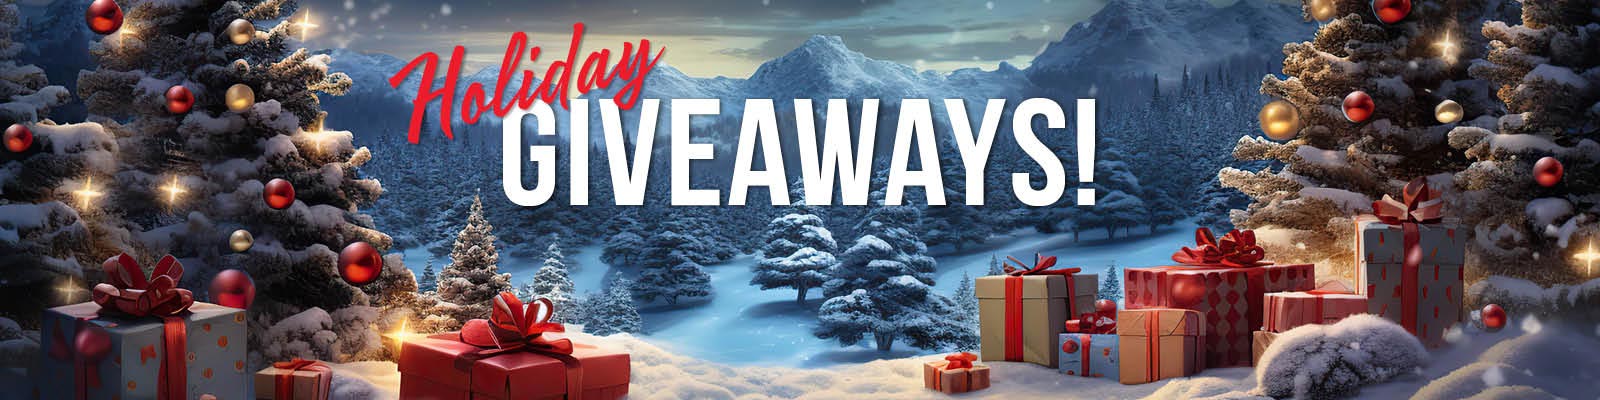 Enter to win one of our holiday giveaways below!